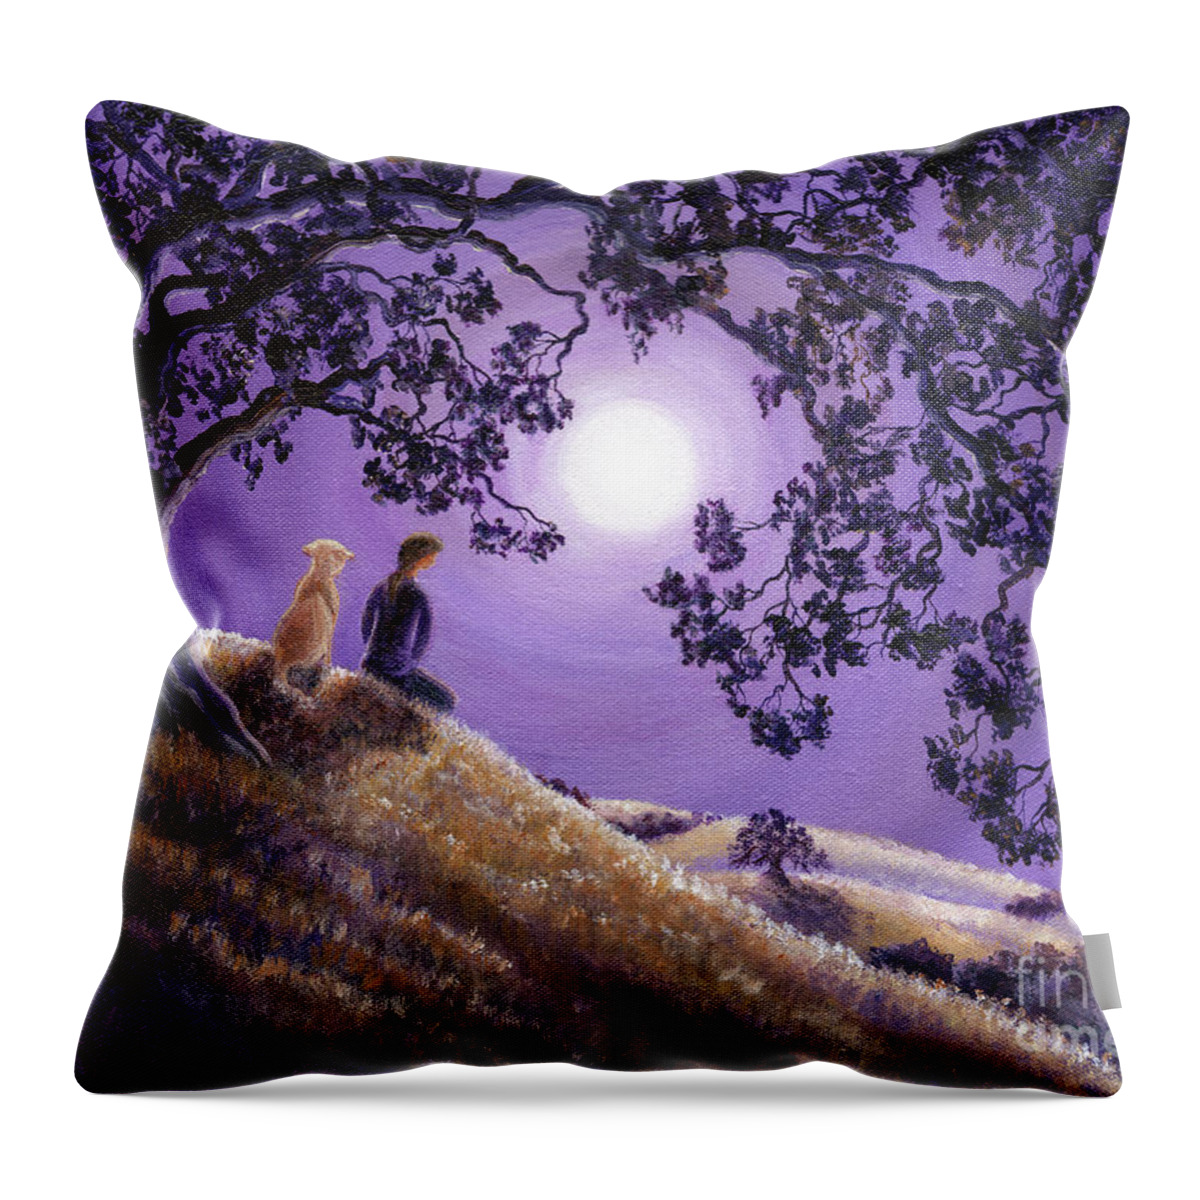 Zen Throw Pillow featuring the painting Oak Tree Meditation by Laura Iverson